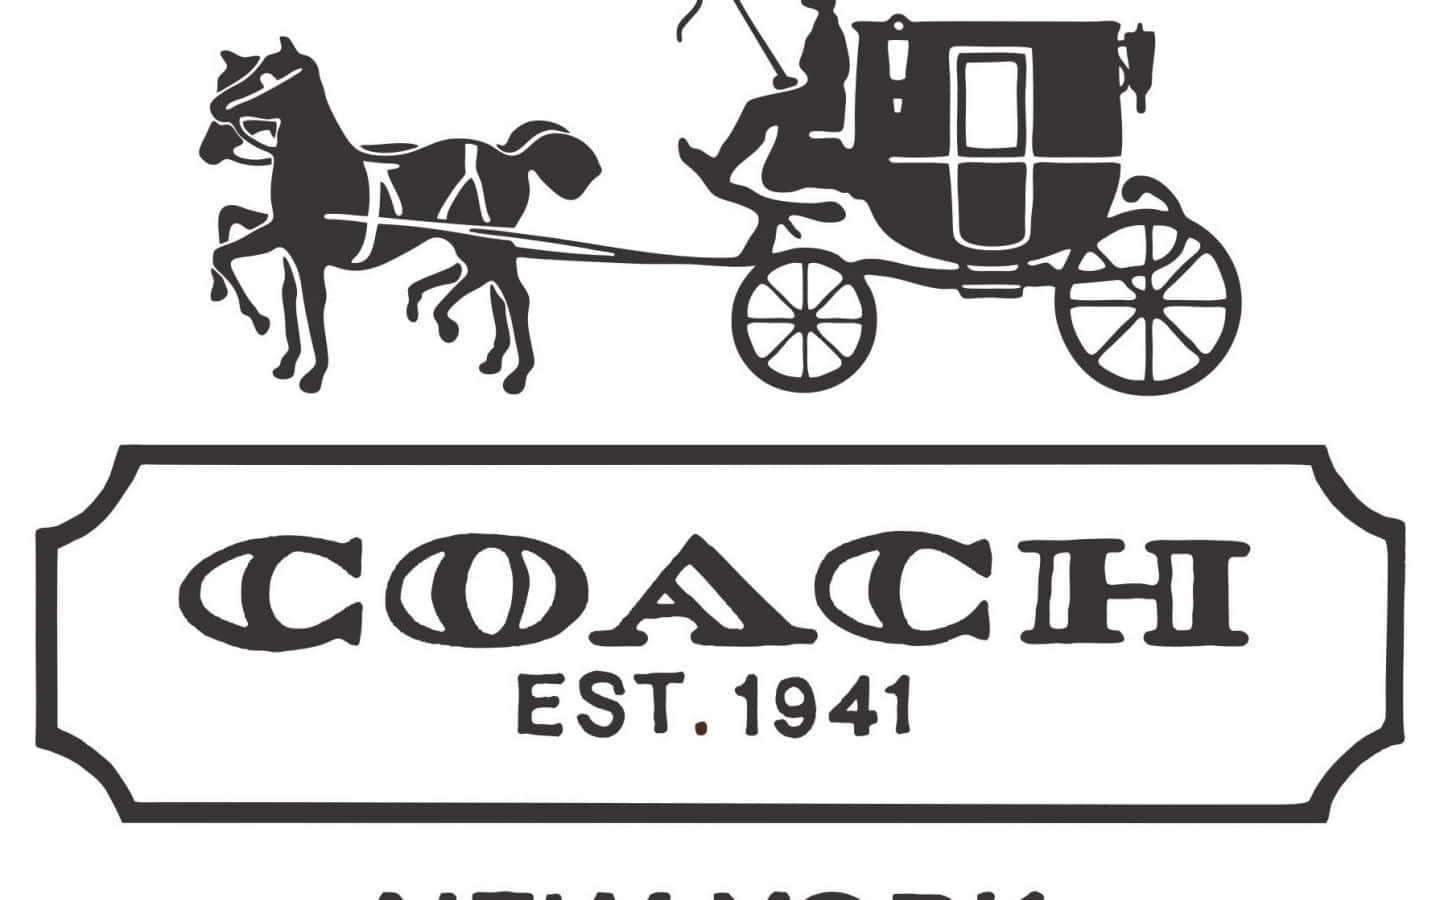 The Coach Logo - Iconic and Modern Wallpaper